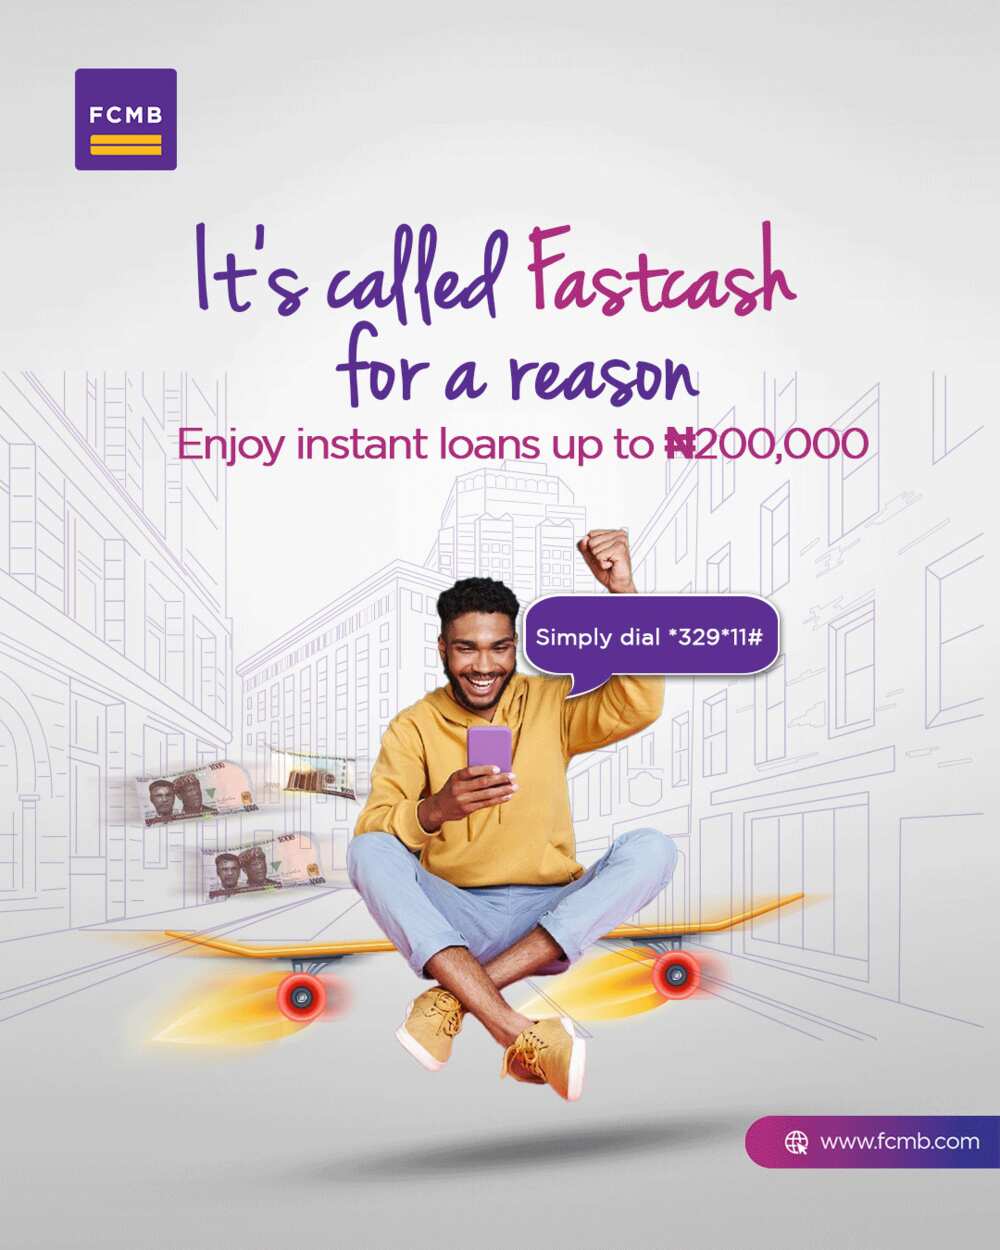 FastCash Offers up to N200,000 in Loans for School Fees Payment in Five Minutes